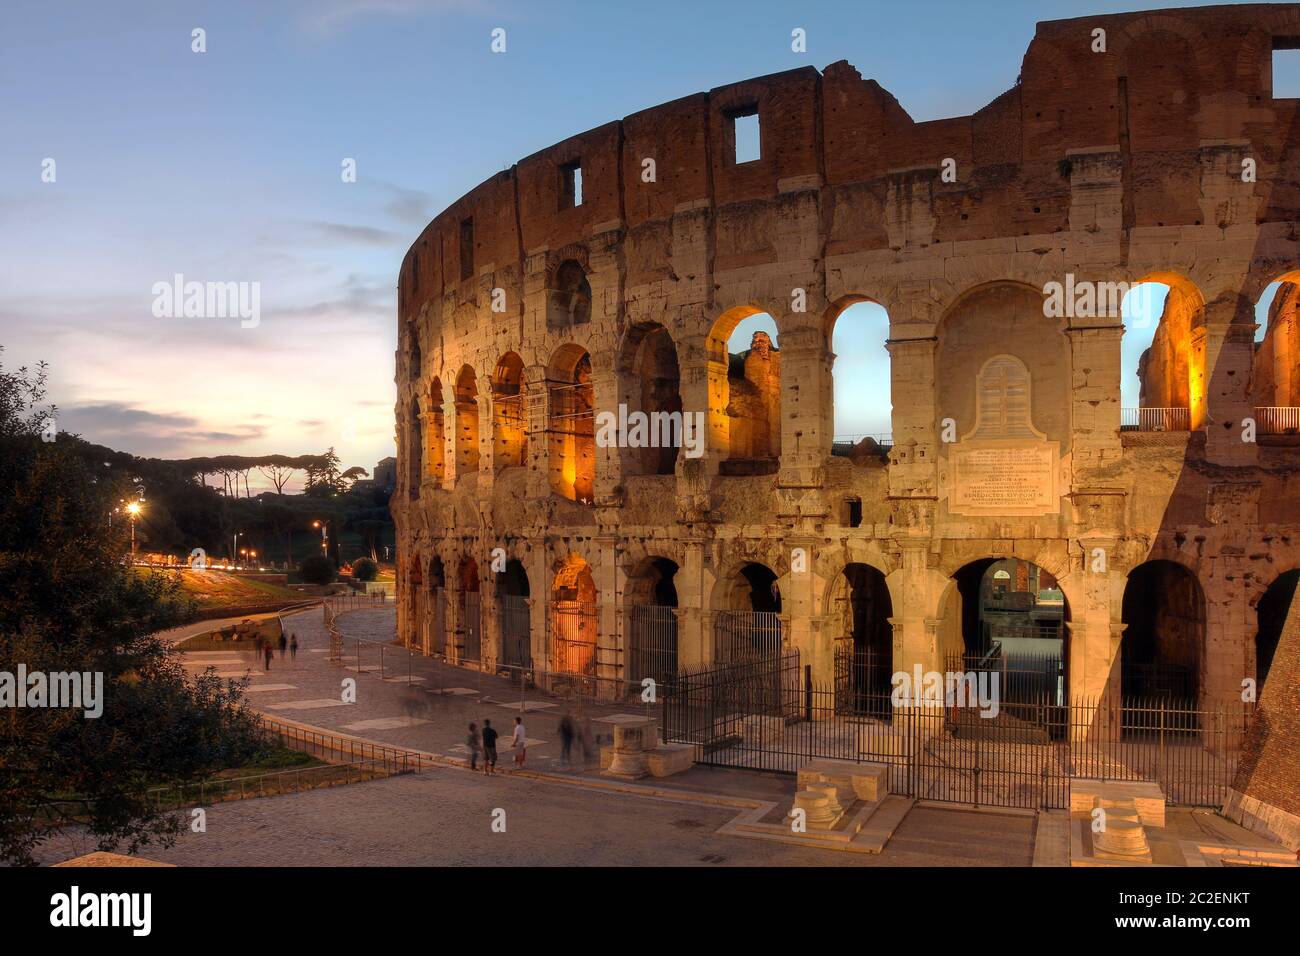 View of the famouse Colloseum in Rome, Italy at sunset time. Stock Photo